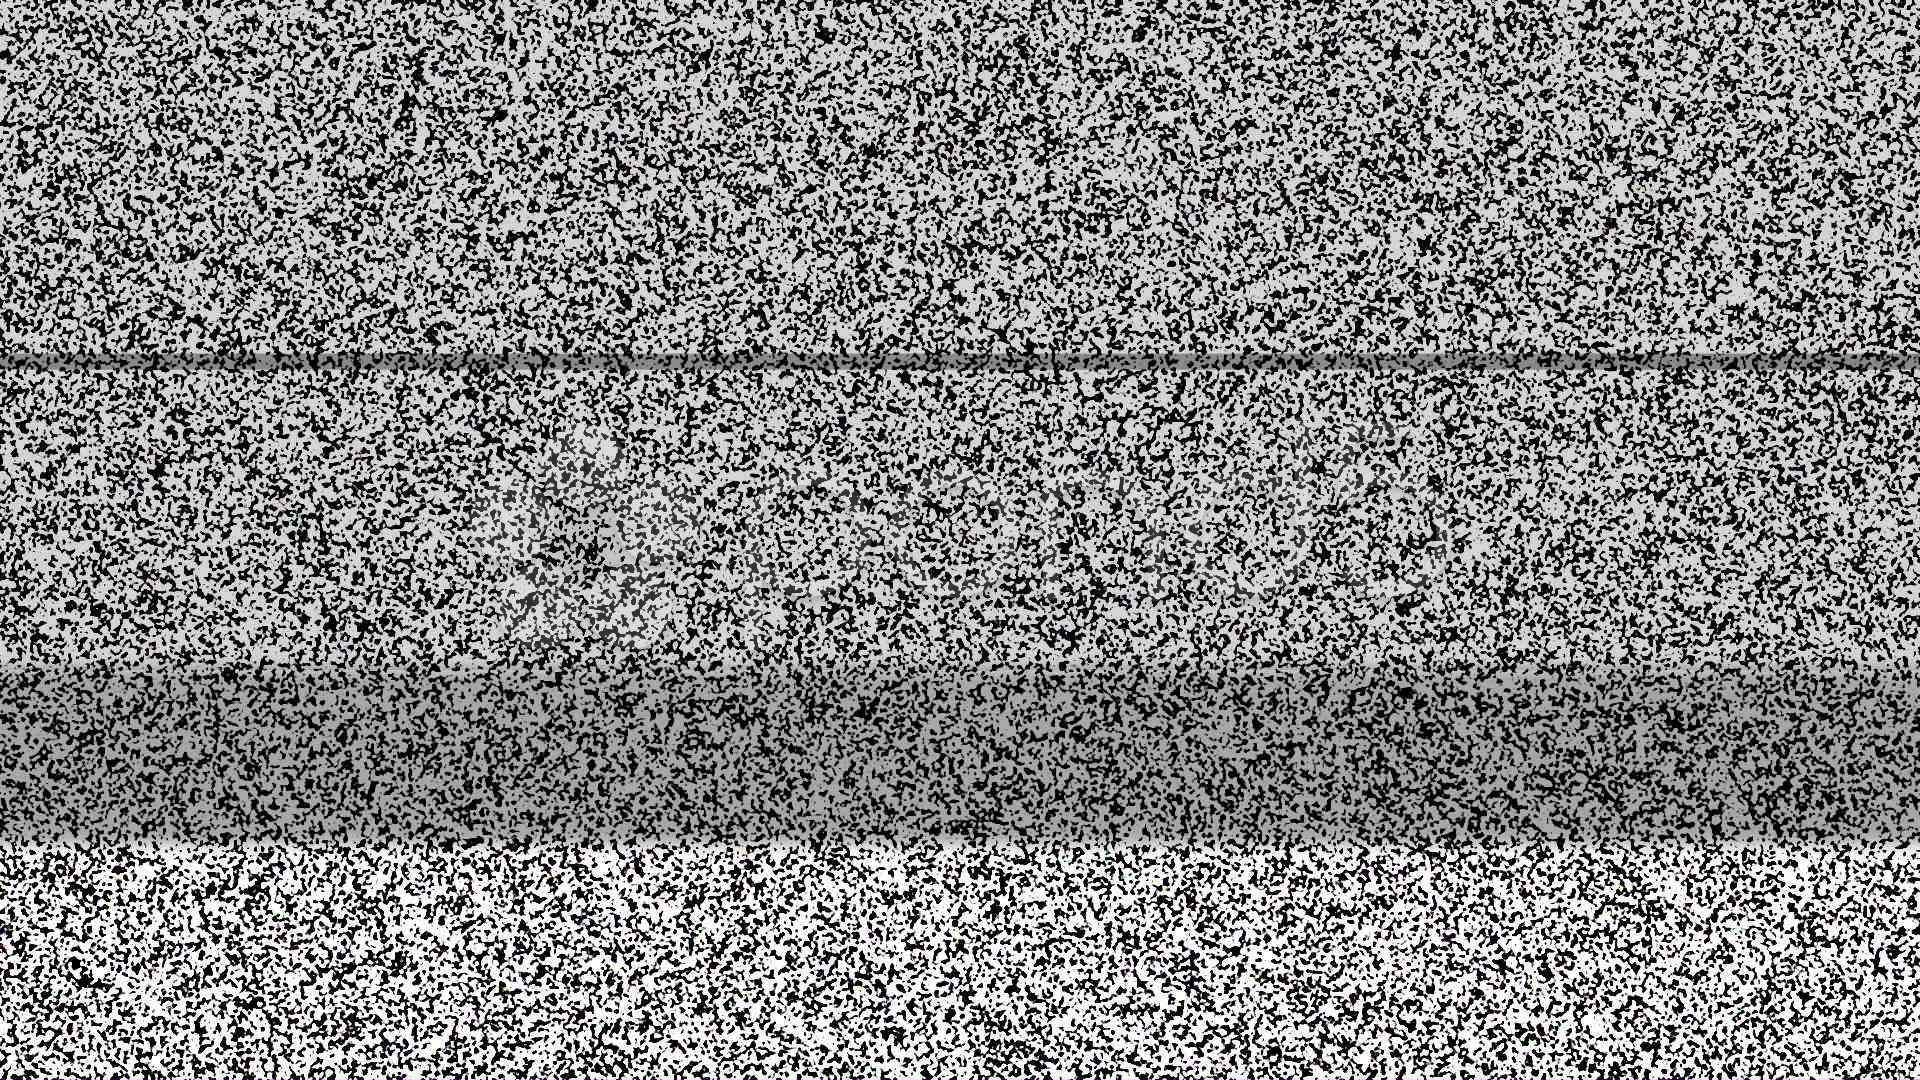 Static TV Noise 1080p with Sound Stock Footage, #Noise#TV#Static